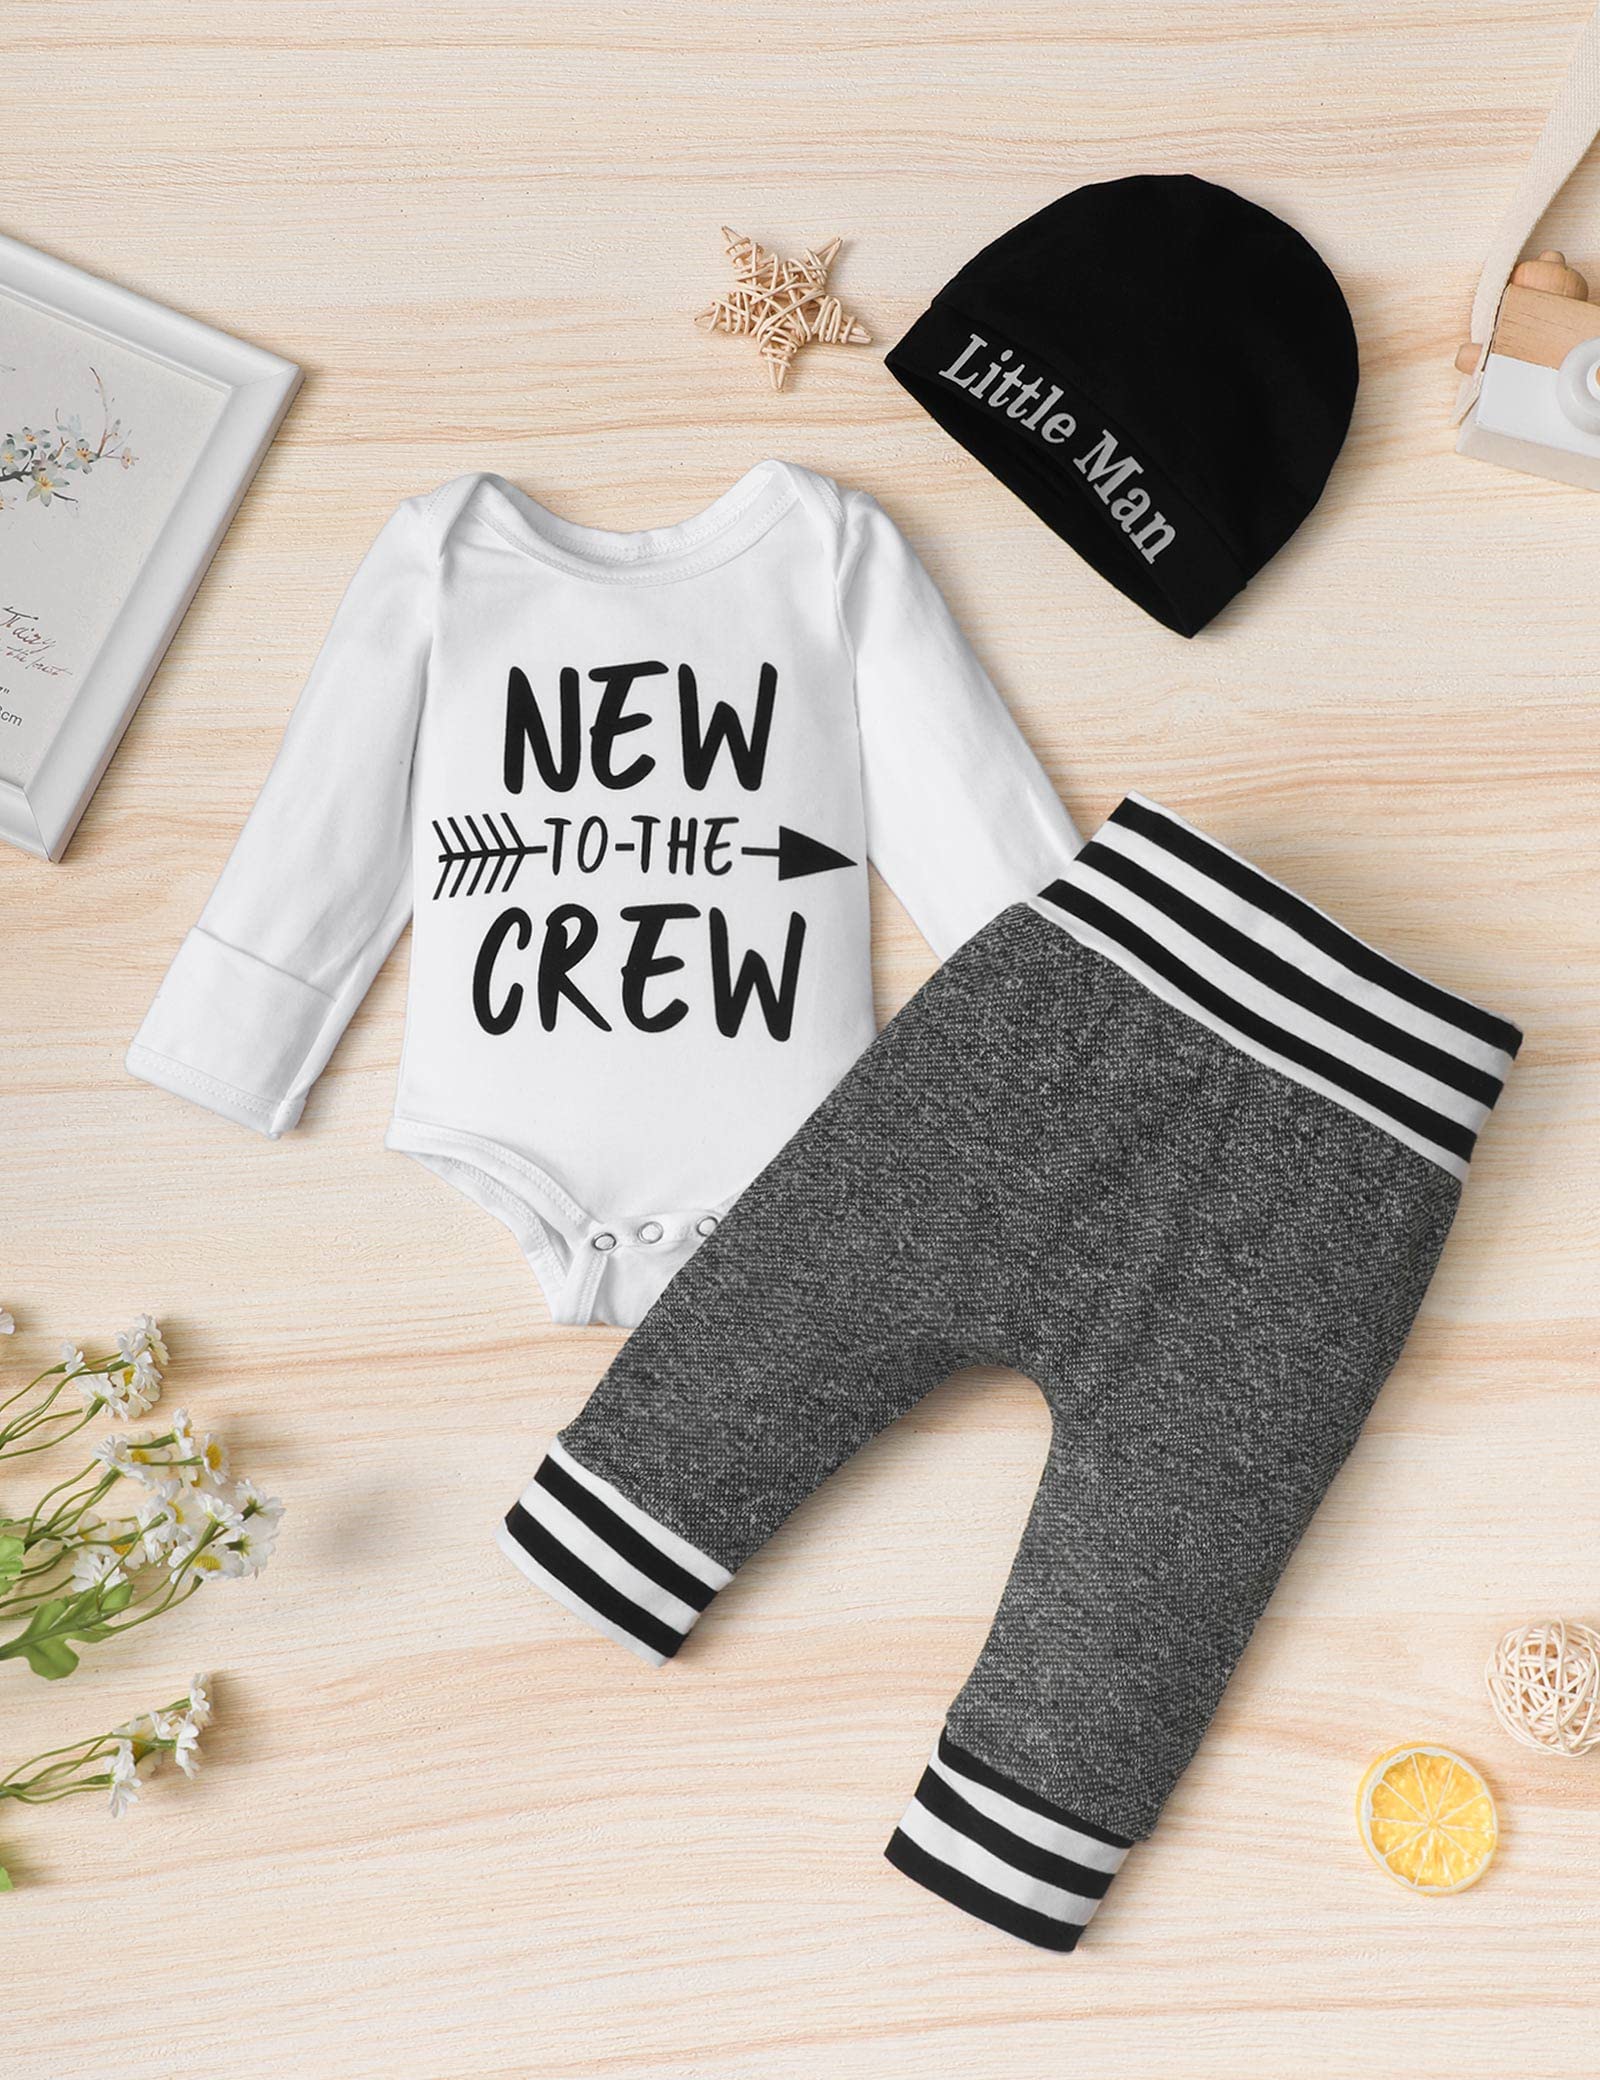 Fommy Newborn Baby Boy Clothes New to The Crew Letter Print Romper+ Pants+Hat 3PCS Outfit